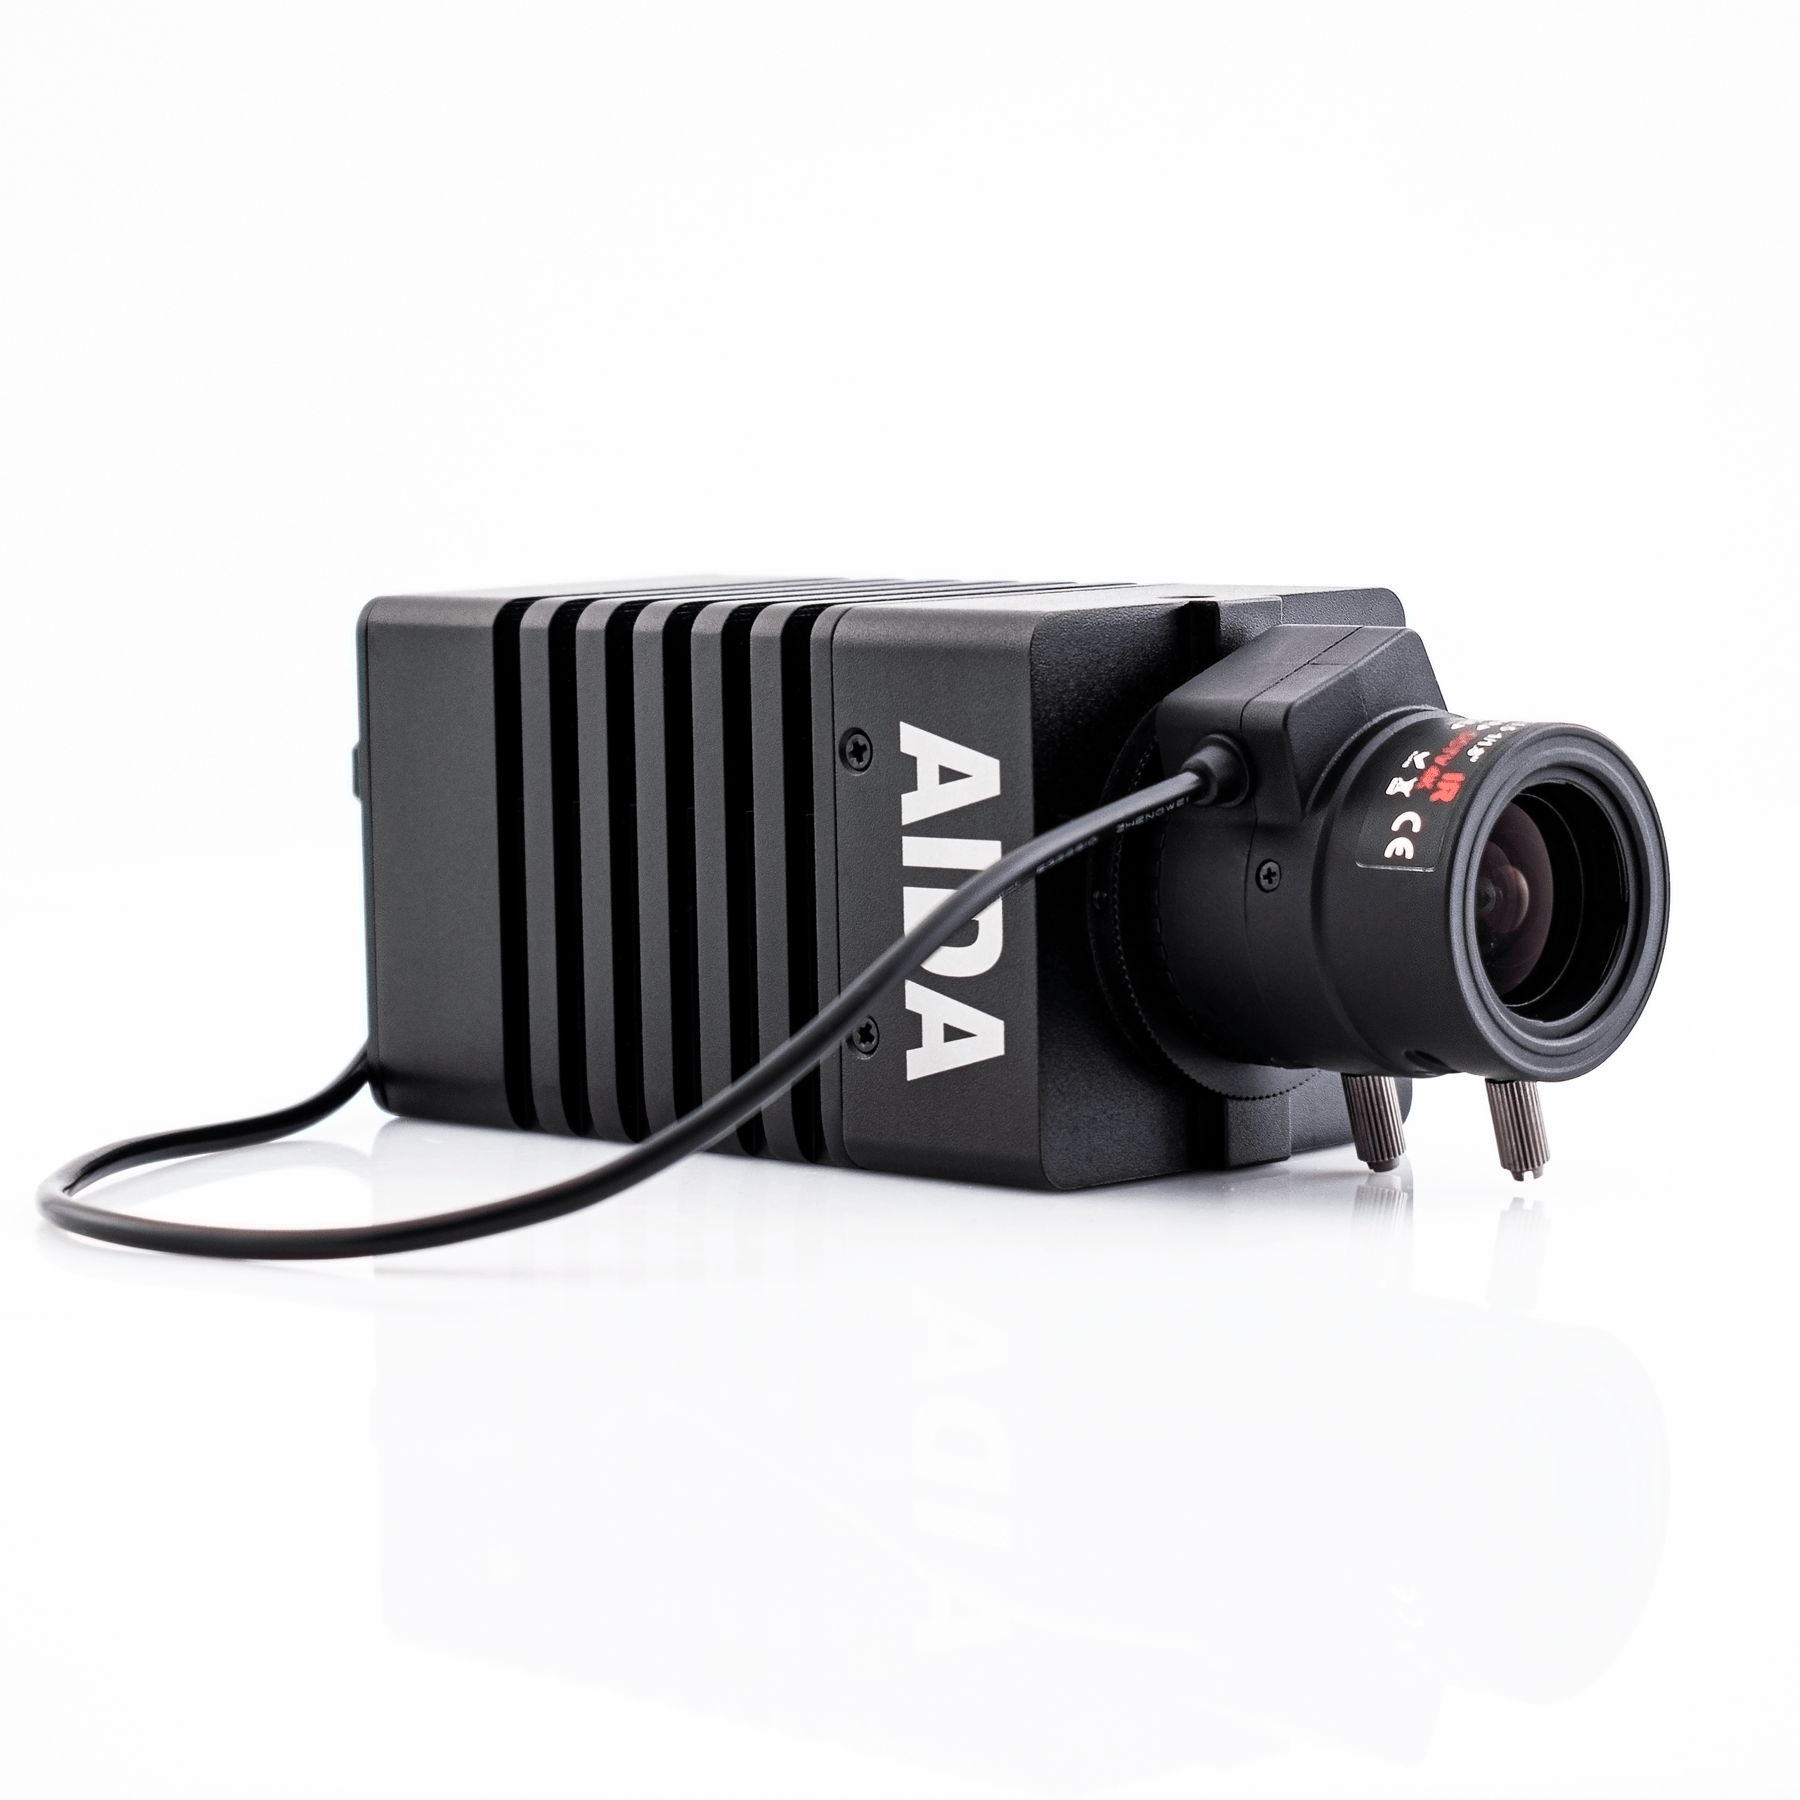 AIDA Imaging UHD-200 4K 60p POV Camera with Varifocal Lens in a Front-Side View with Socket Adapter